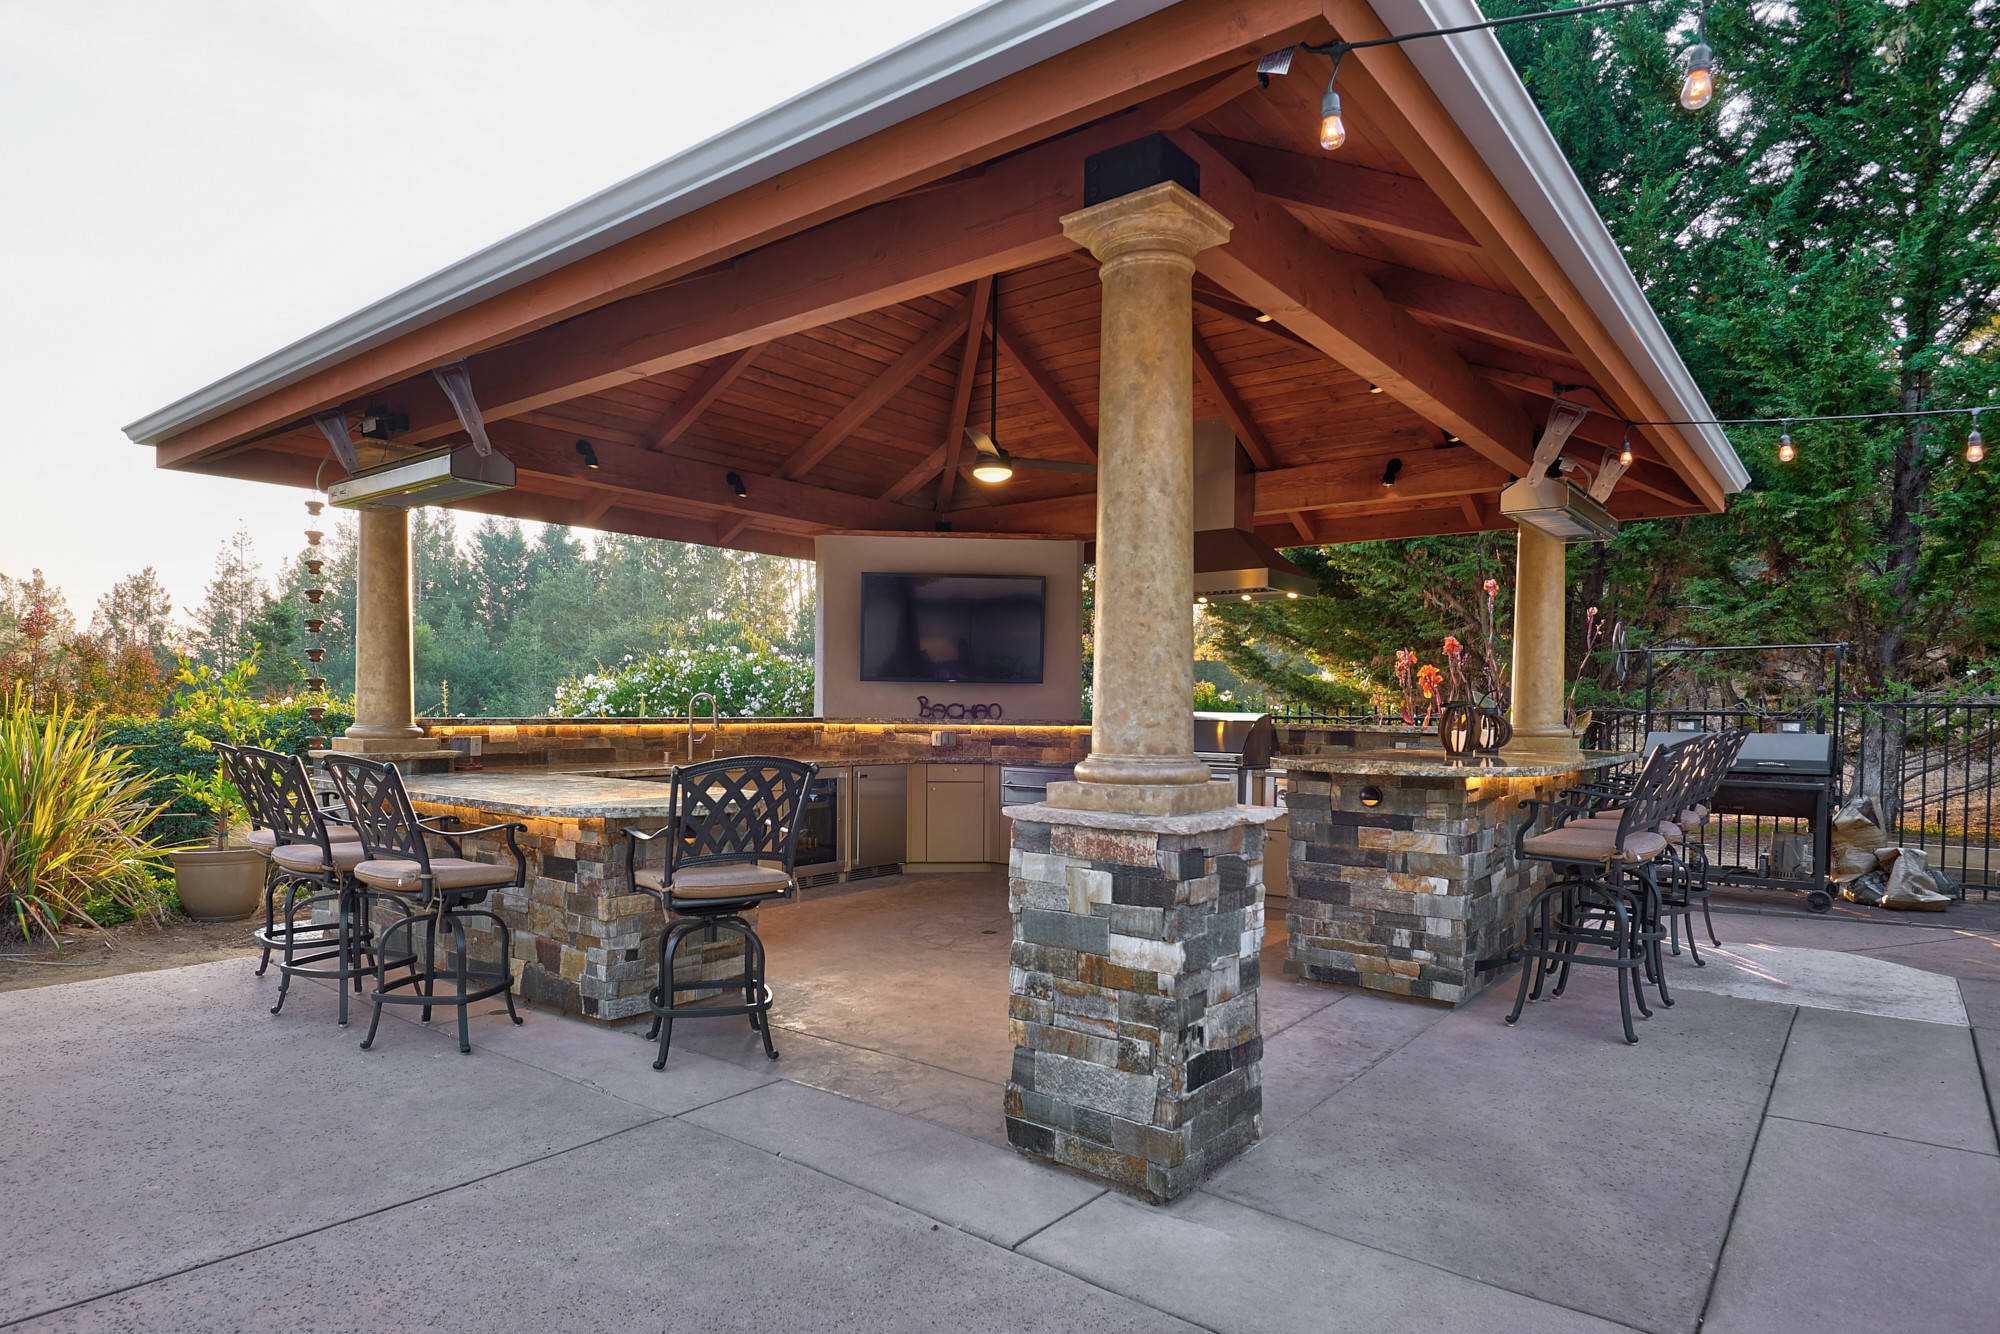 20 Outdoor Kitchen with a Gazebo Ideas You'll Love   June, 20 ...